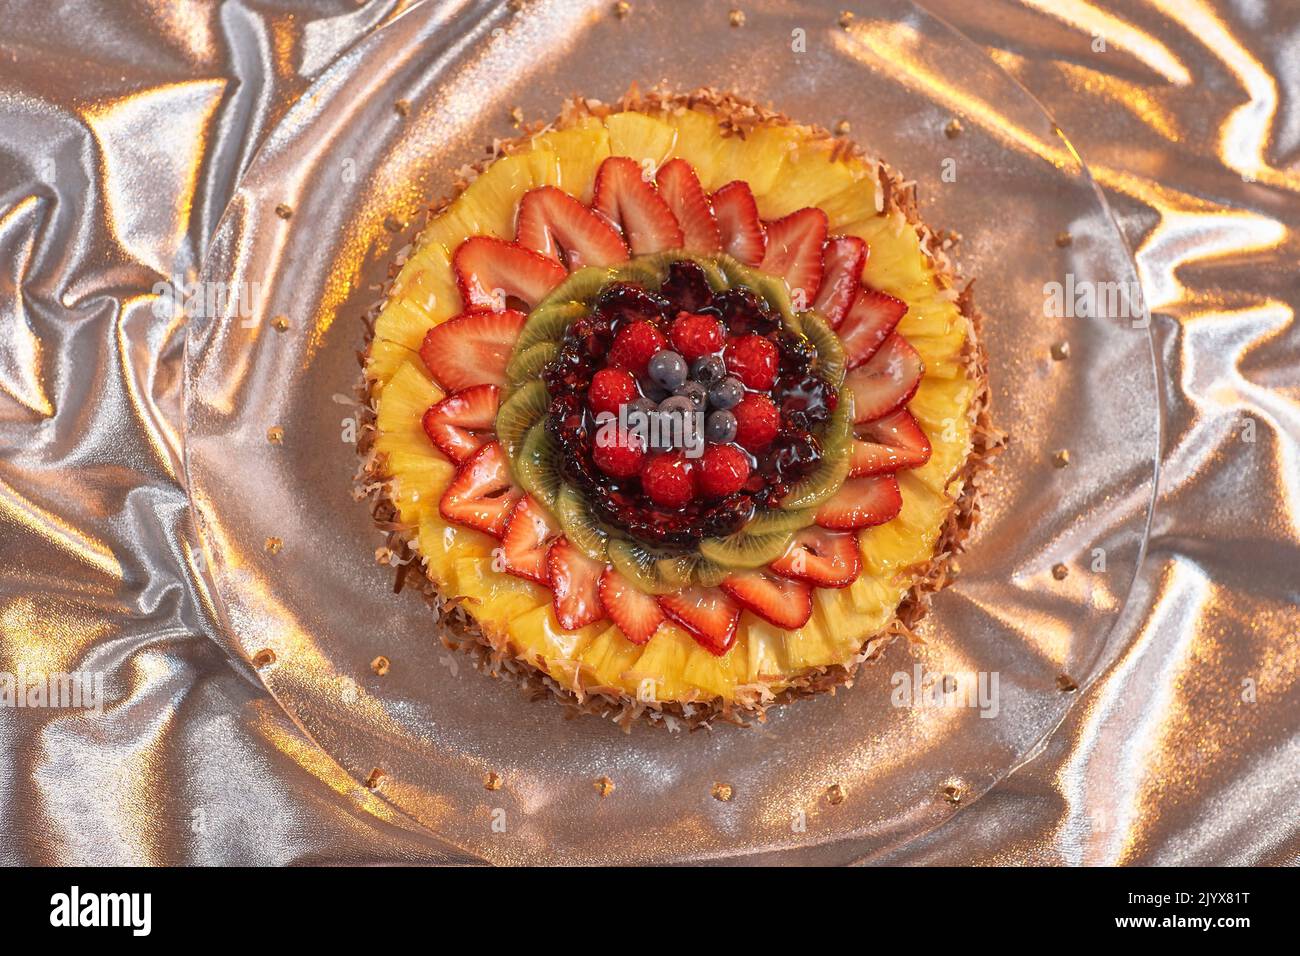 Fruit pie, round fruit pastry with toasted coconut crust.  Coconut cream custard topped with pineapple, strawberries, kiwi, blackberries, raspberries. Stock Photo